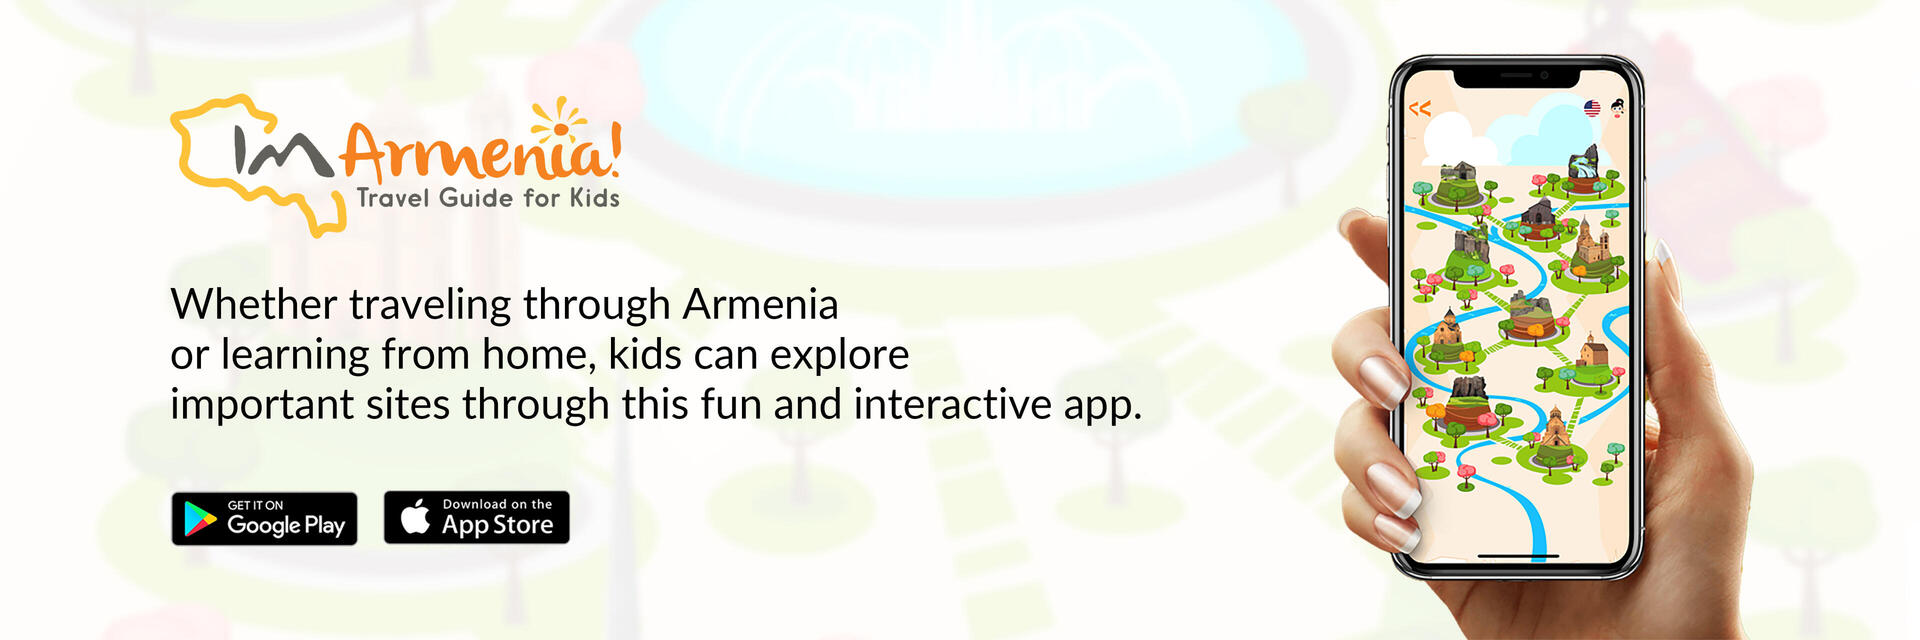 Learn Armenian vocabulary (Eastern) as you style your profile and pack your suitcase  Enjoy colorful graphics of some of the most popular tourist sites in Yerevan and its surroundings